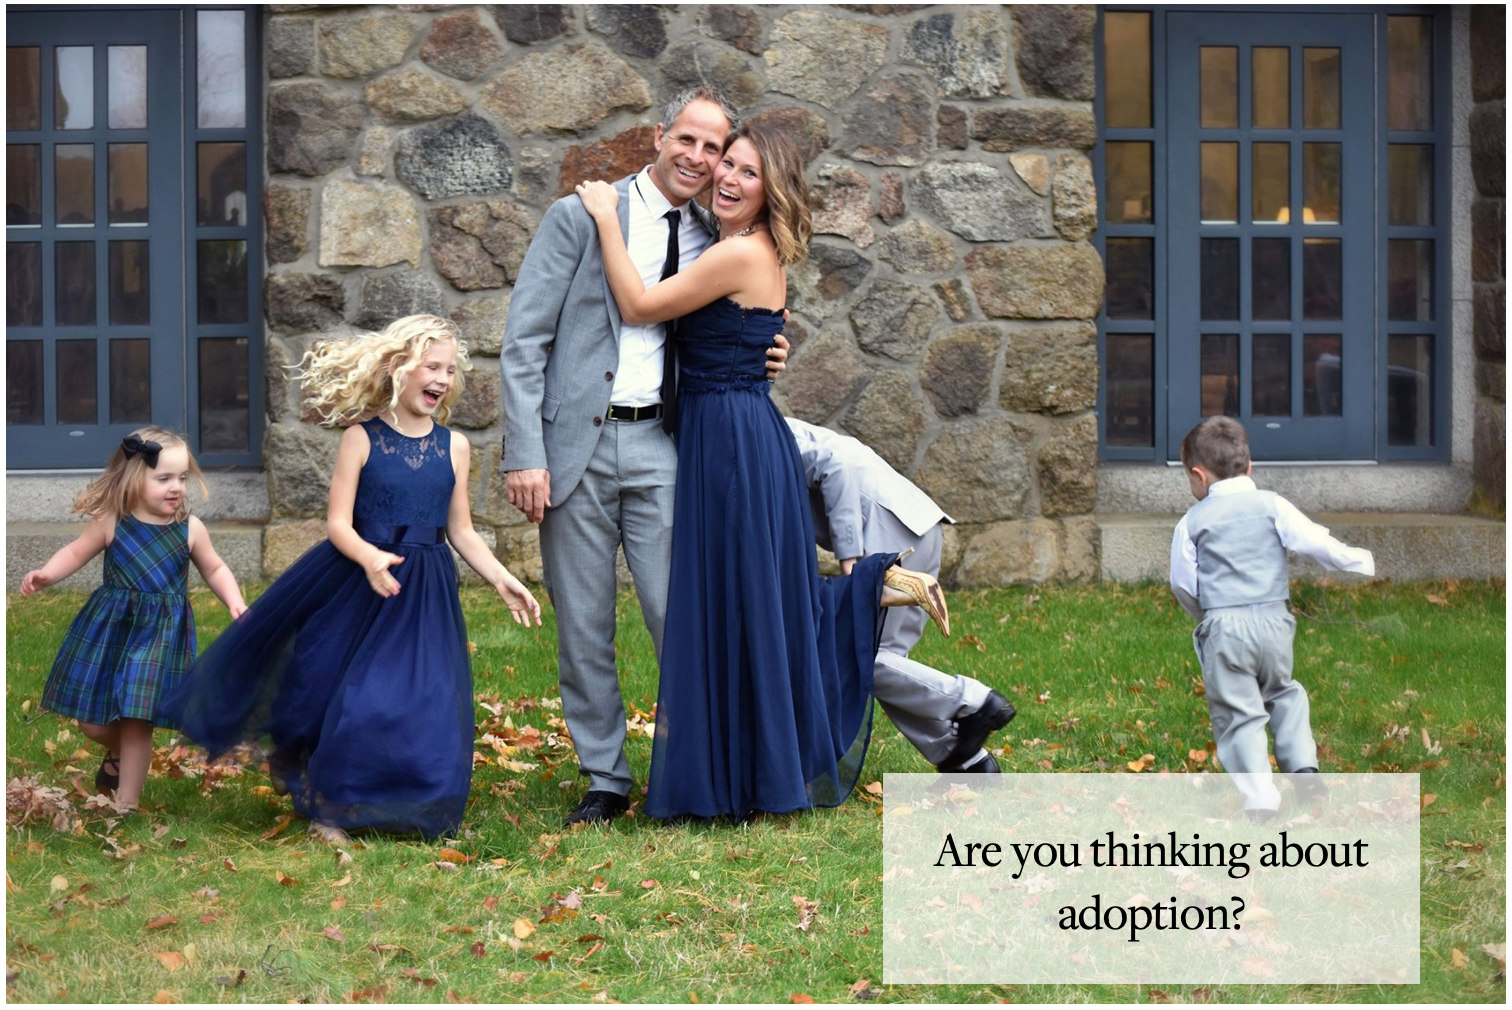 Are You Thinking About Adoption?